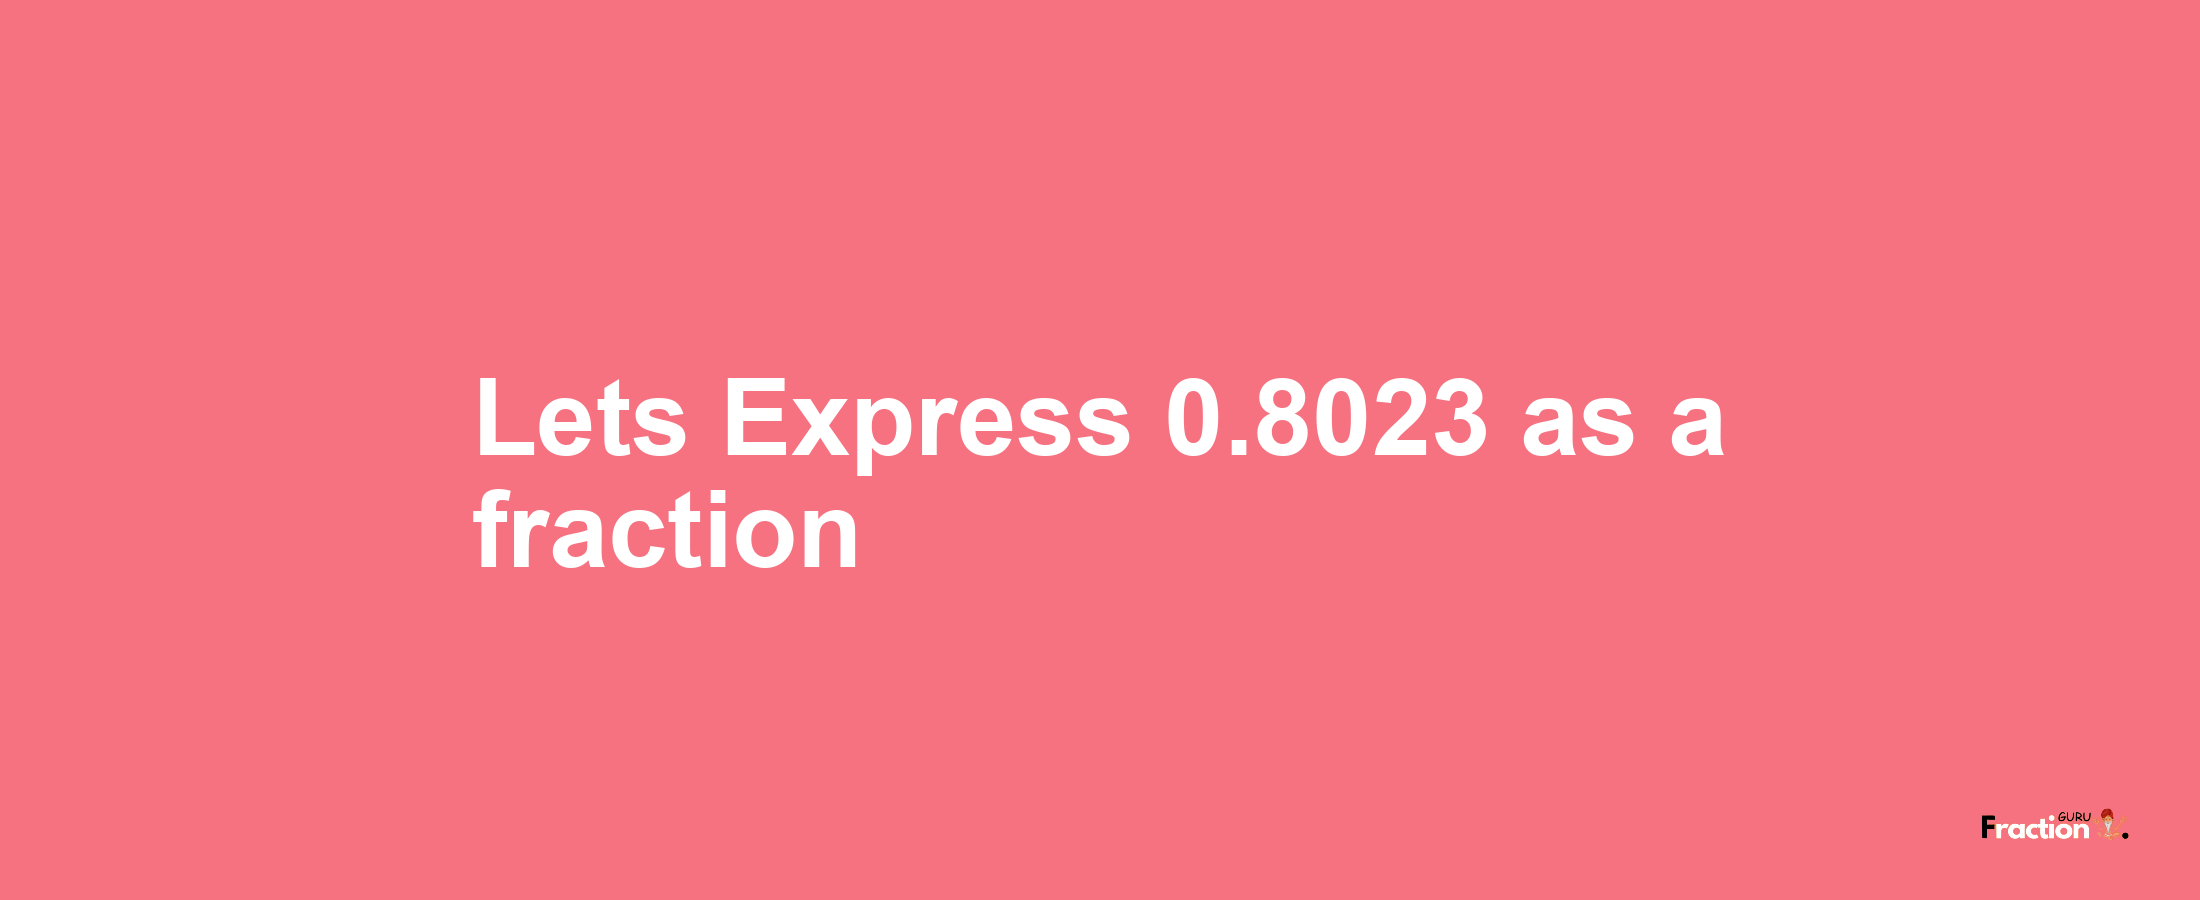 Lets Express 0.8023 as afraction